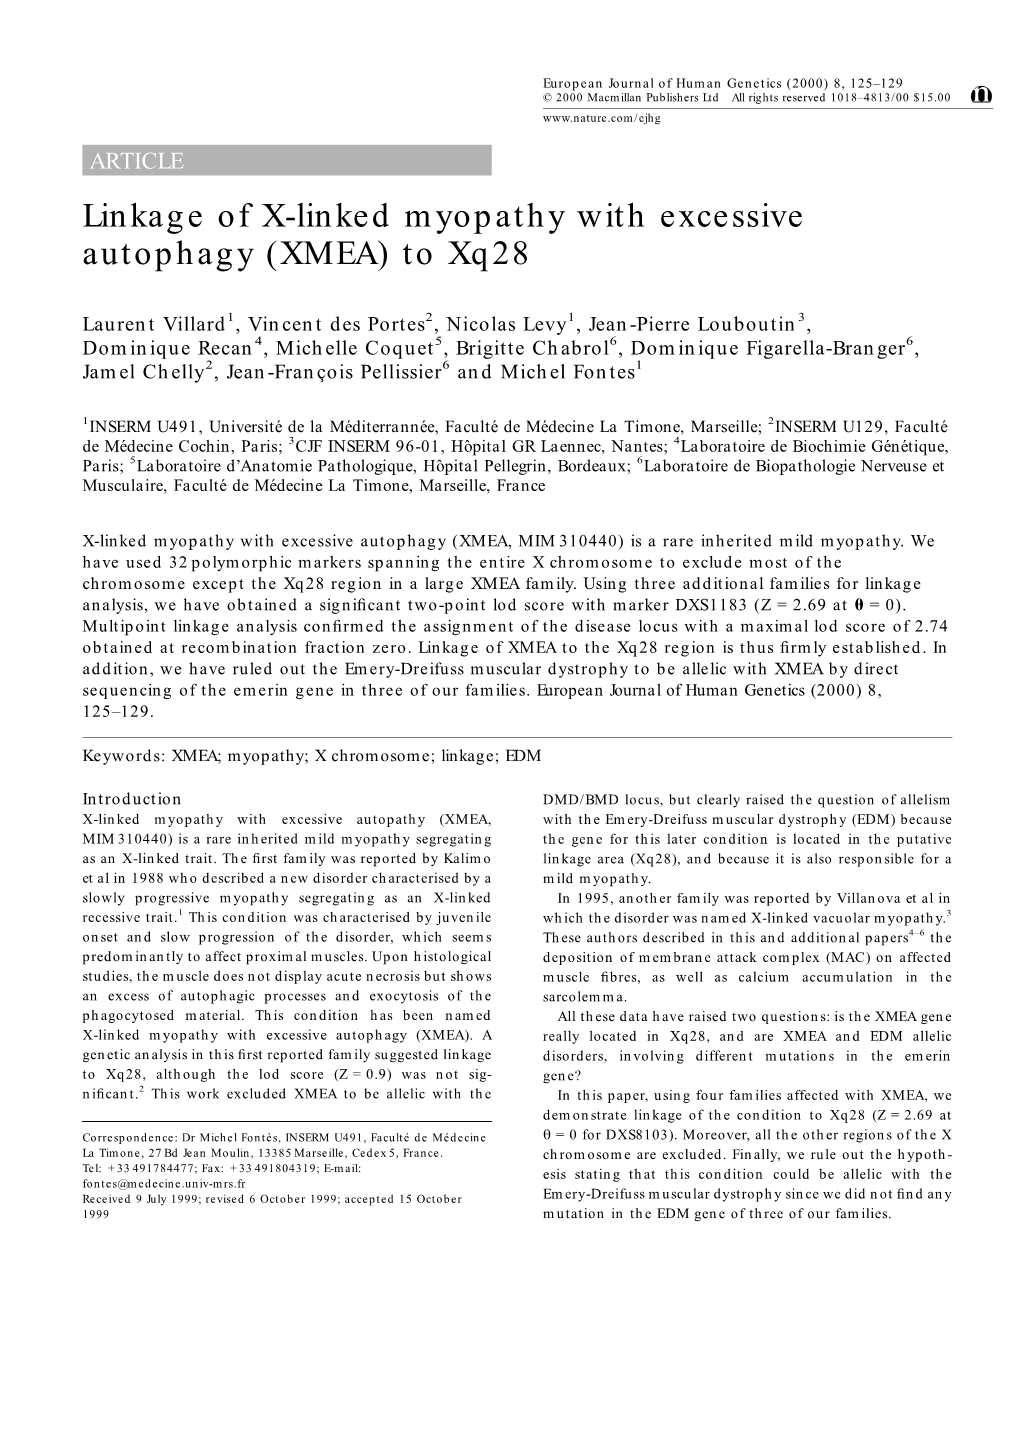 Linkage of X-Linked Myopathy with Excessive Autophagy (XMEA) to Xq28